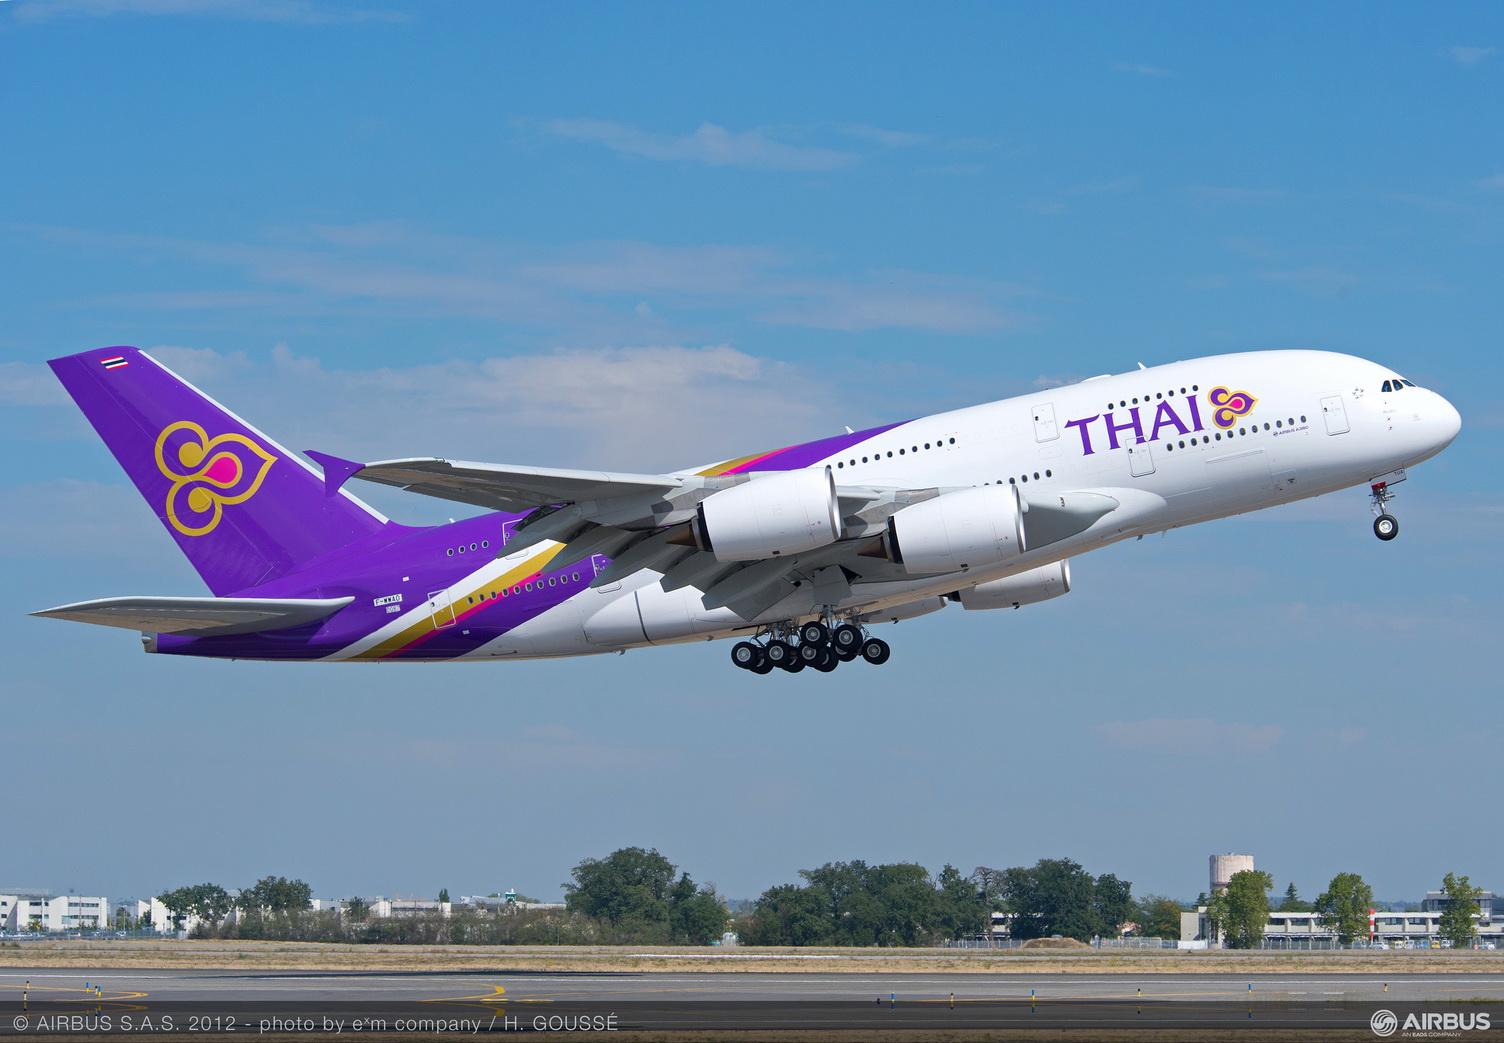 Airline Livery of the Week: Thai Airways Purple on an